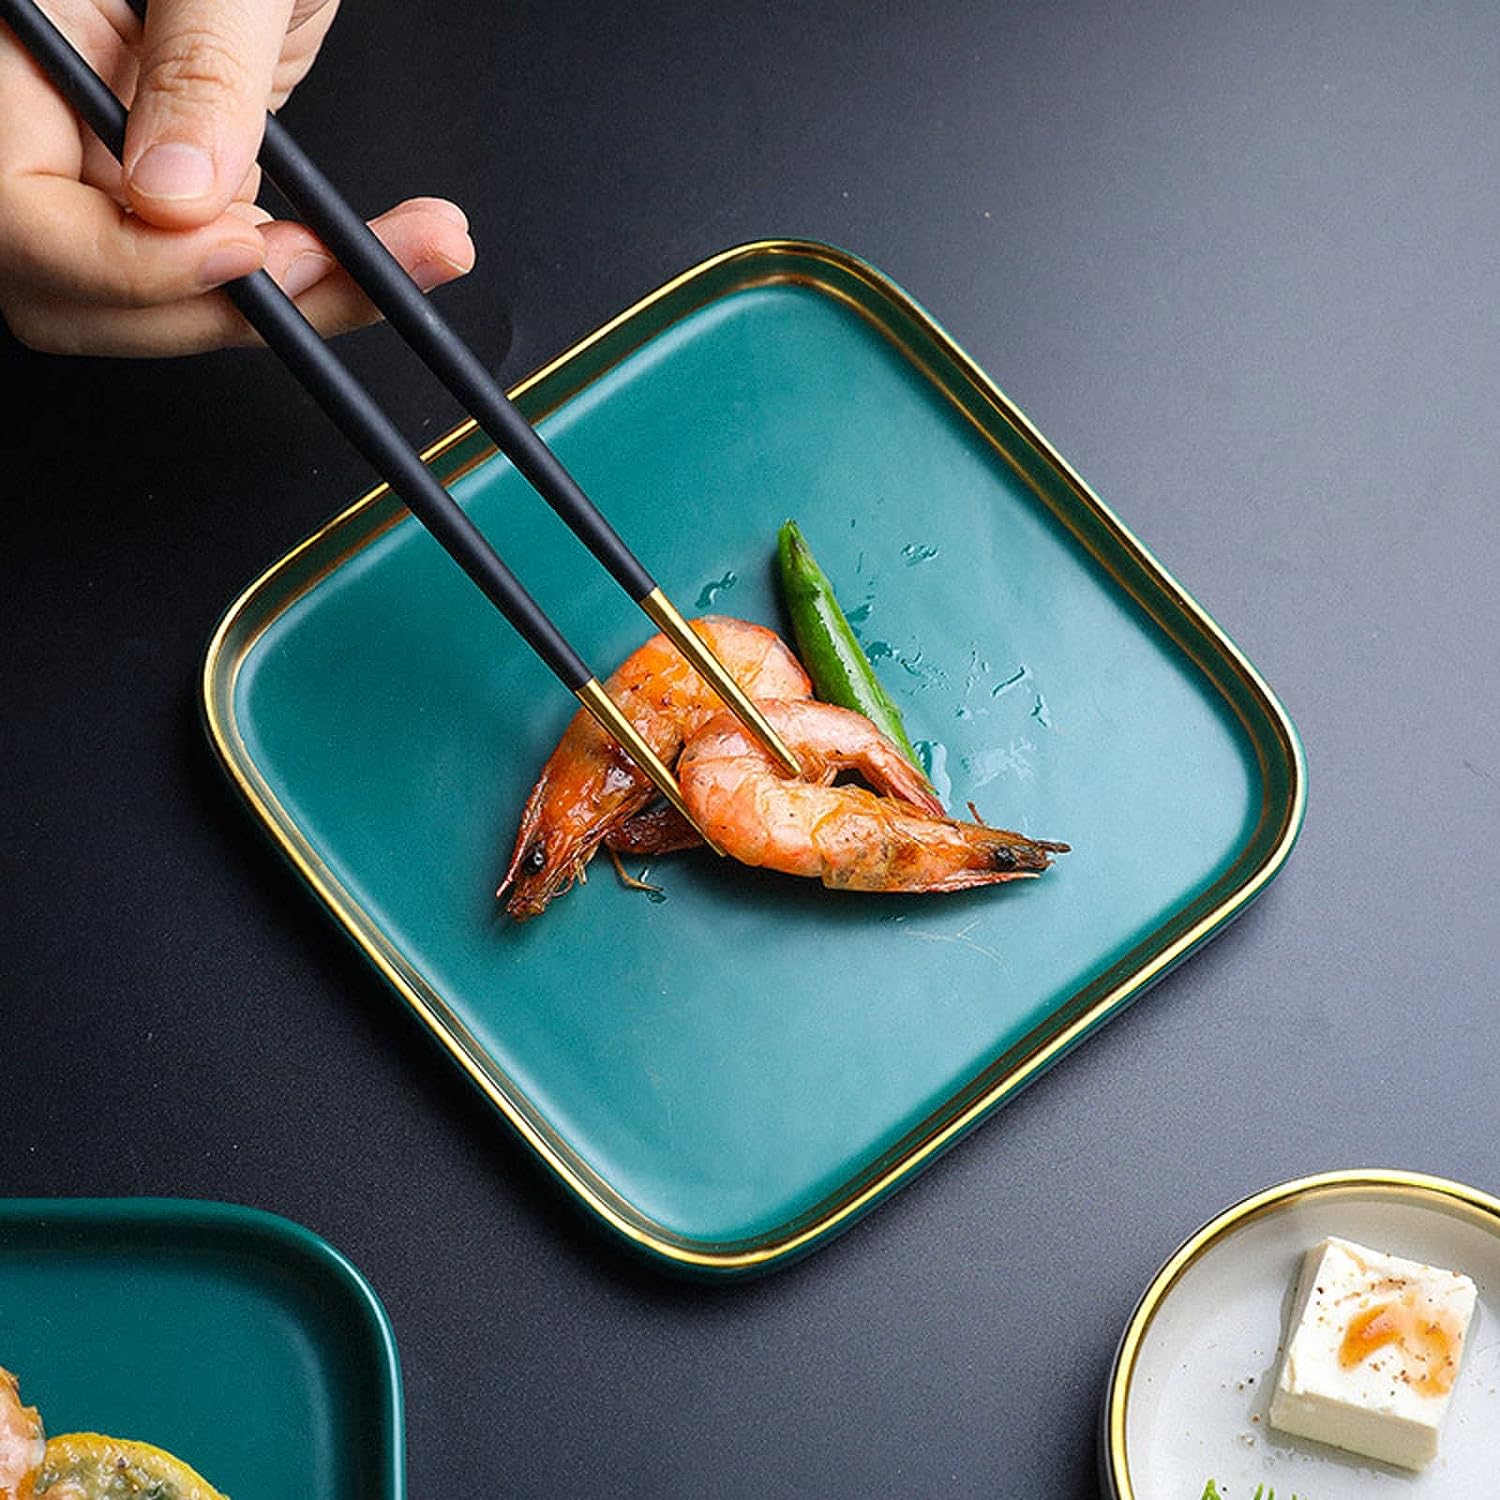 How to use chopsticks properly and seven chopsticks taboos to avoid in Japan